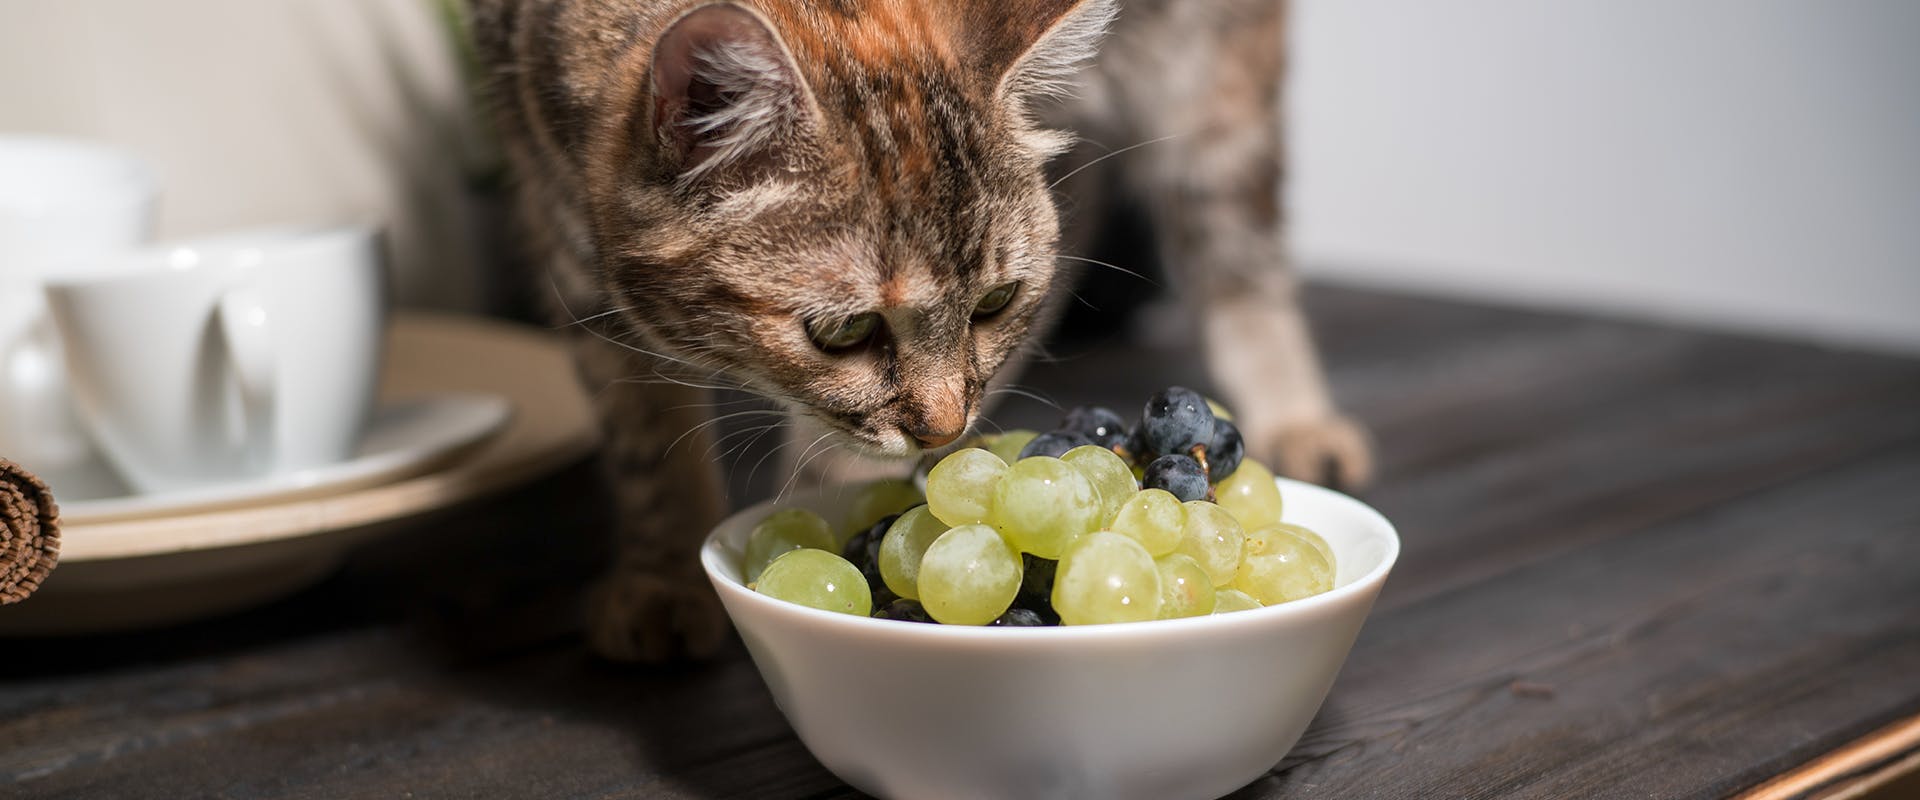 A cat standing on a work top, sniffing at a bowl of green and red grapes